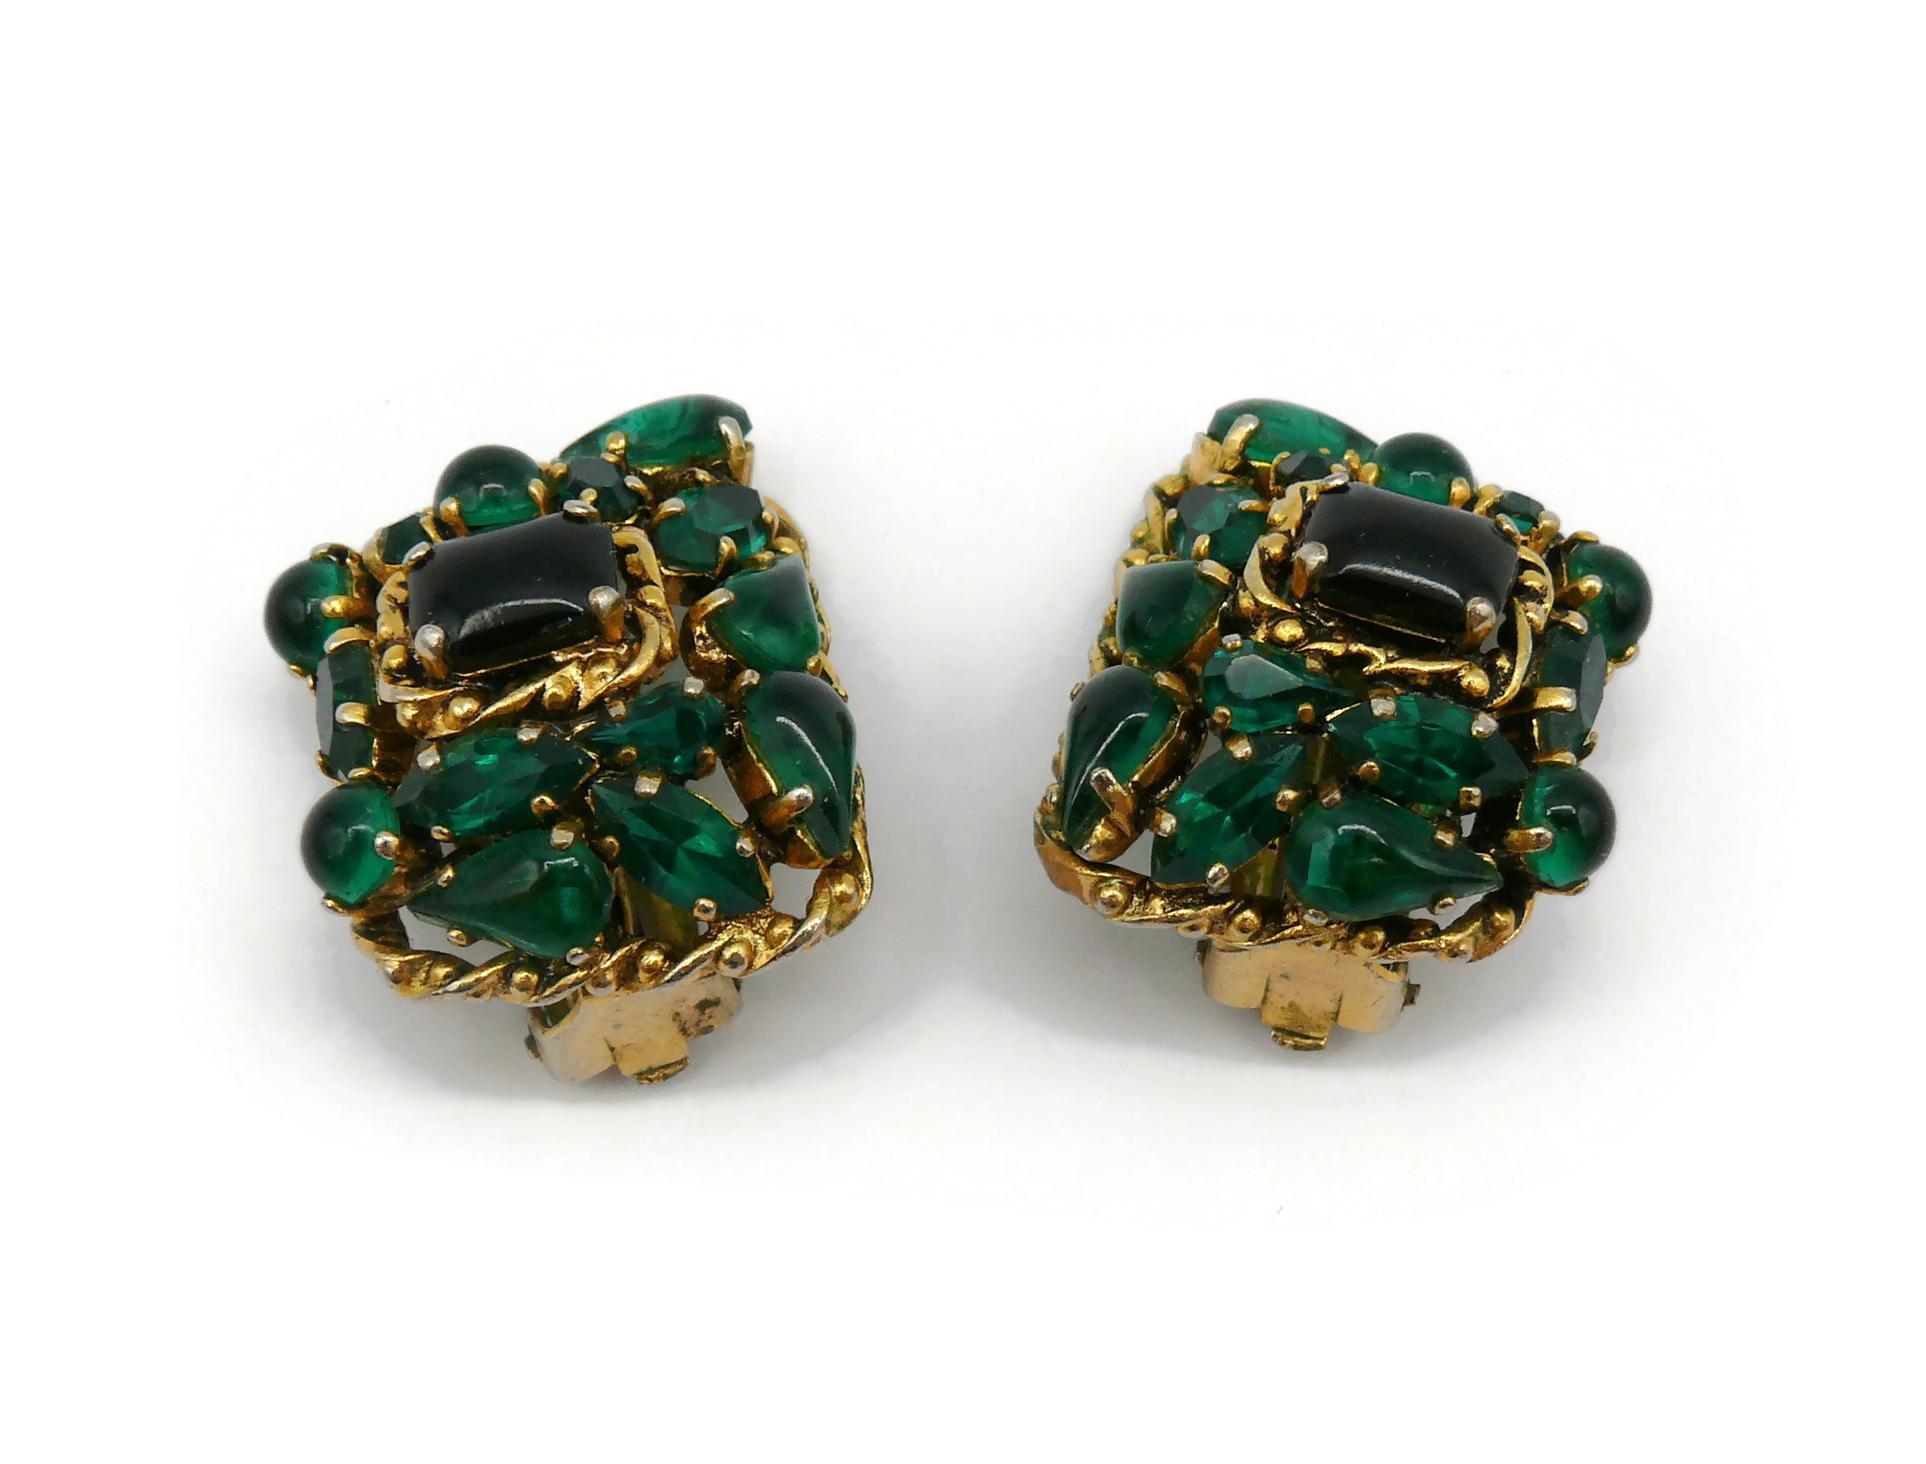 CHRISTIAN DIOR Vintage Jewelled Clip-On Earrings, 1963 For Sale 3